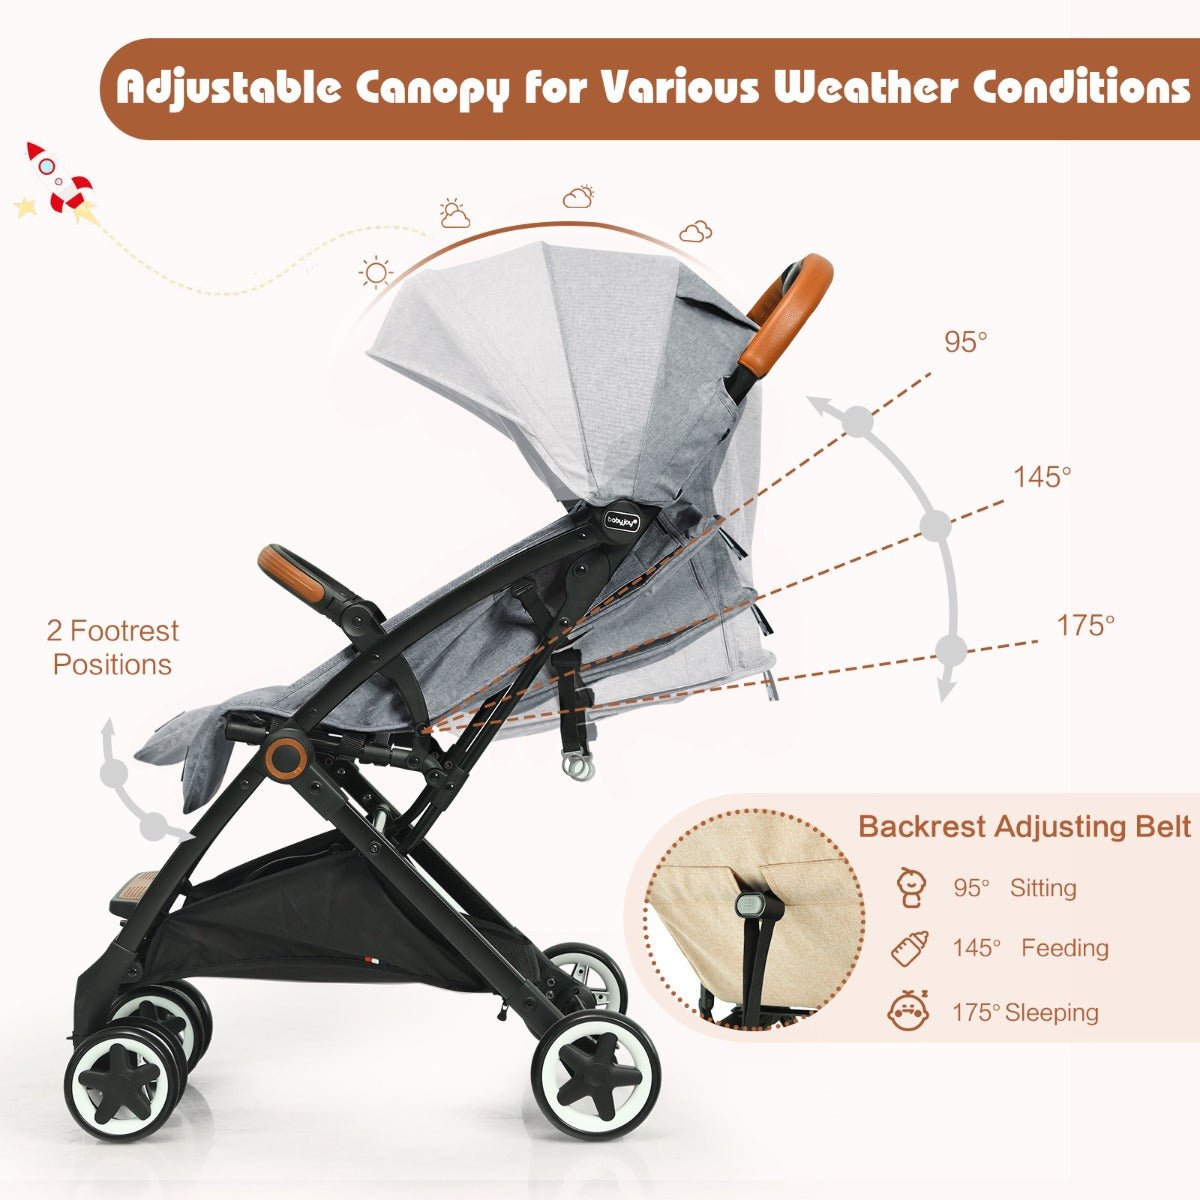 Multipurpose Grey Stroller with Canopy for Sun Protection